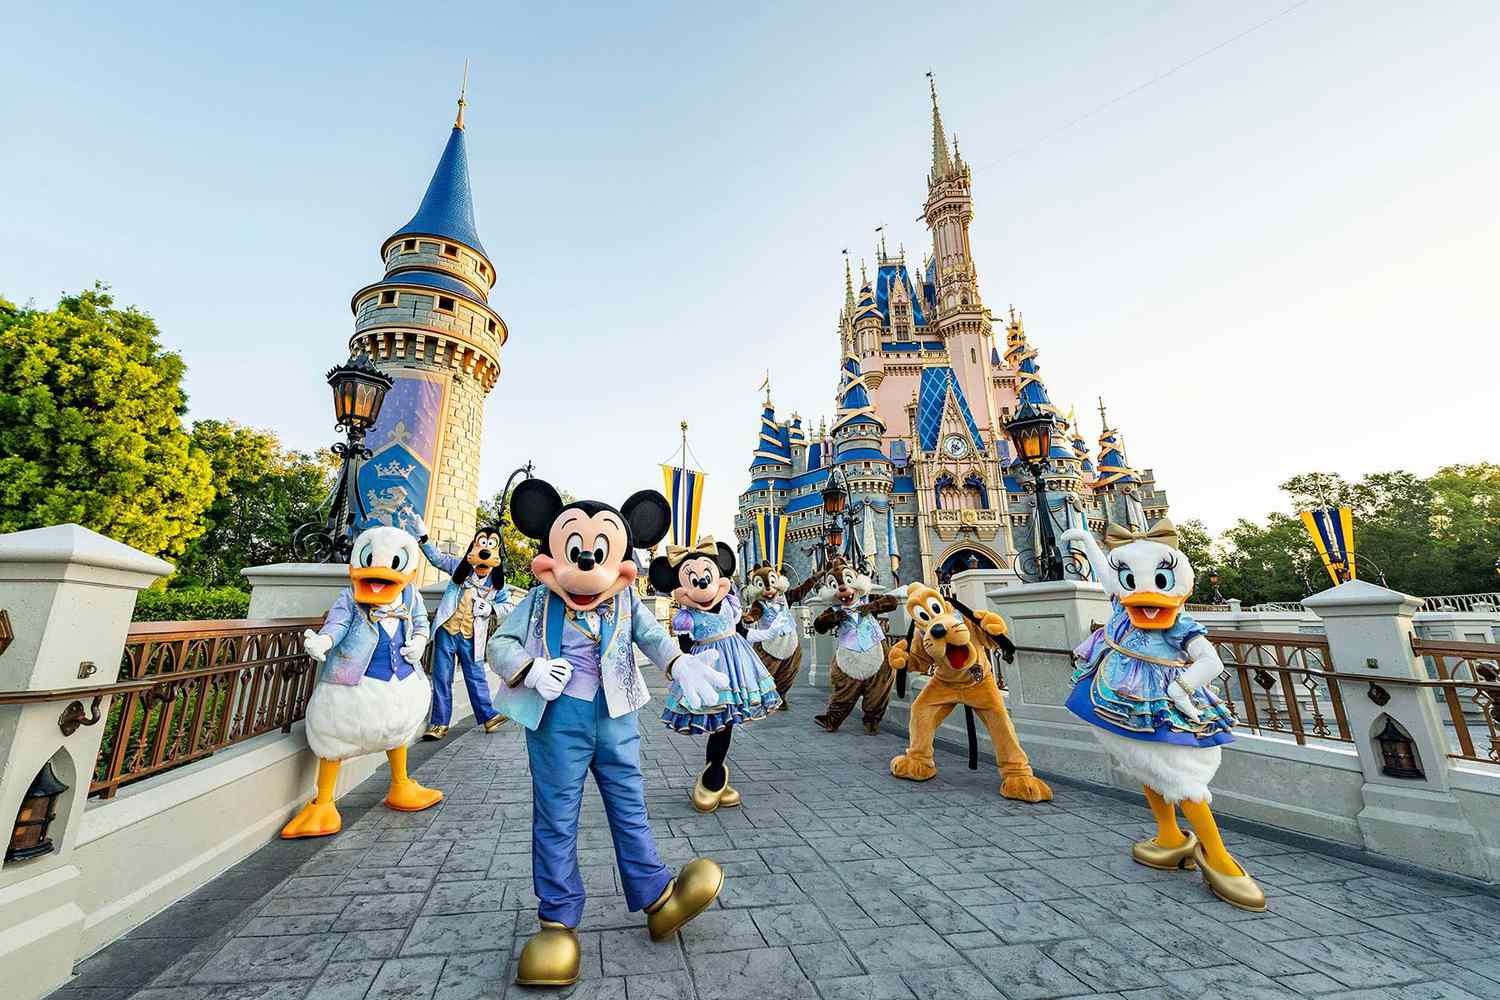 Disney Has Declared That Guests Who Misrepresent Their Disability Will Be Banned for Life